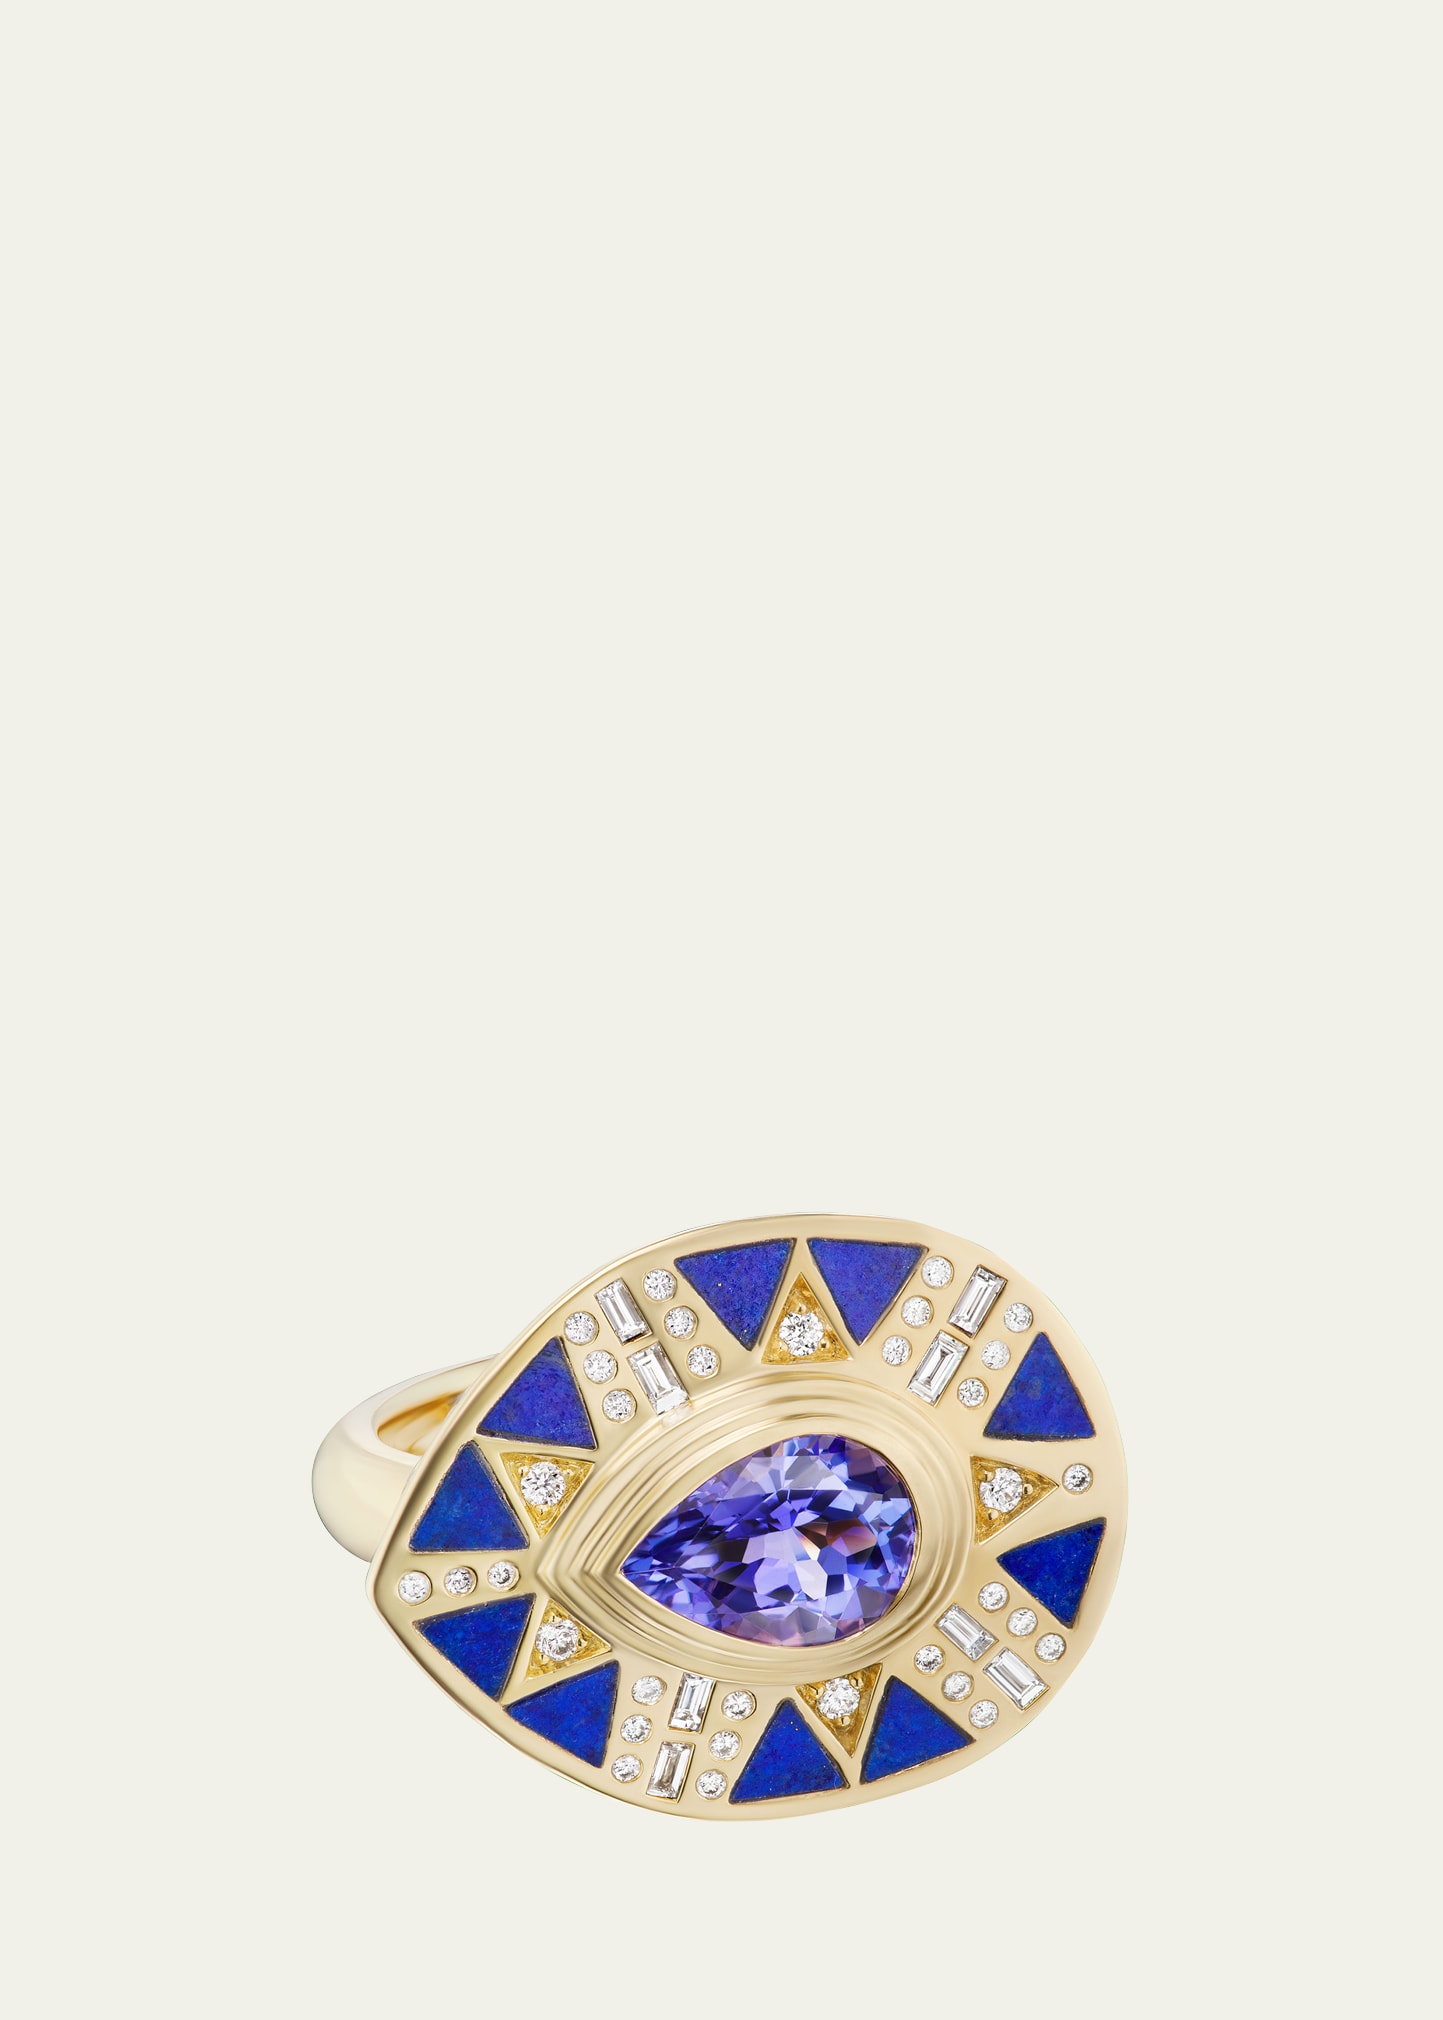 Harwell Godfrey Cleopatra's Tear Statement Ring With Lapis And Tanzanite In Lapis Tanz